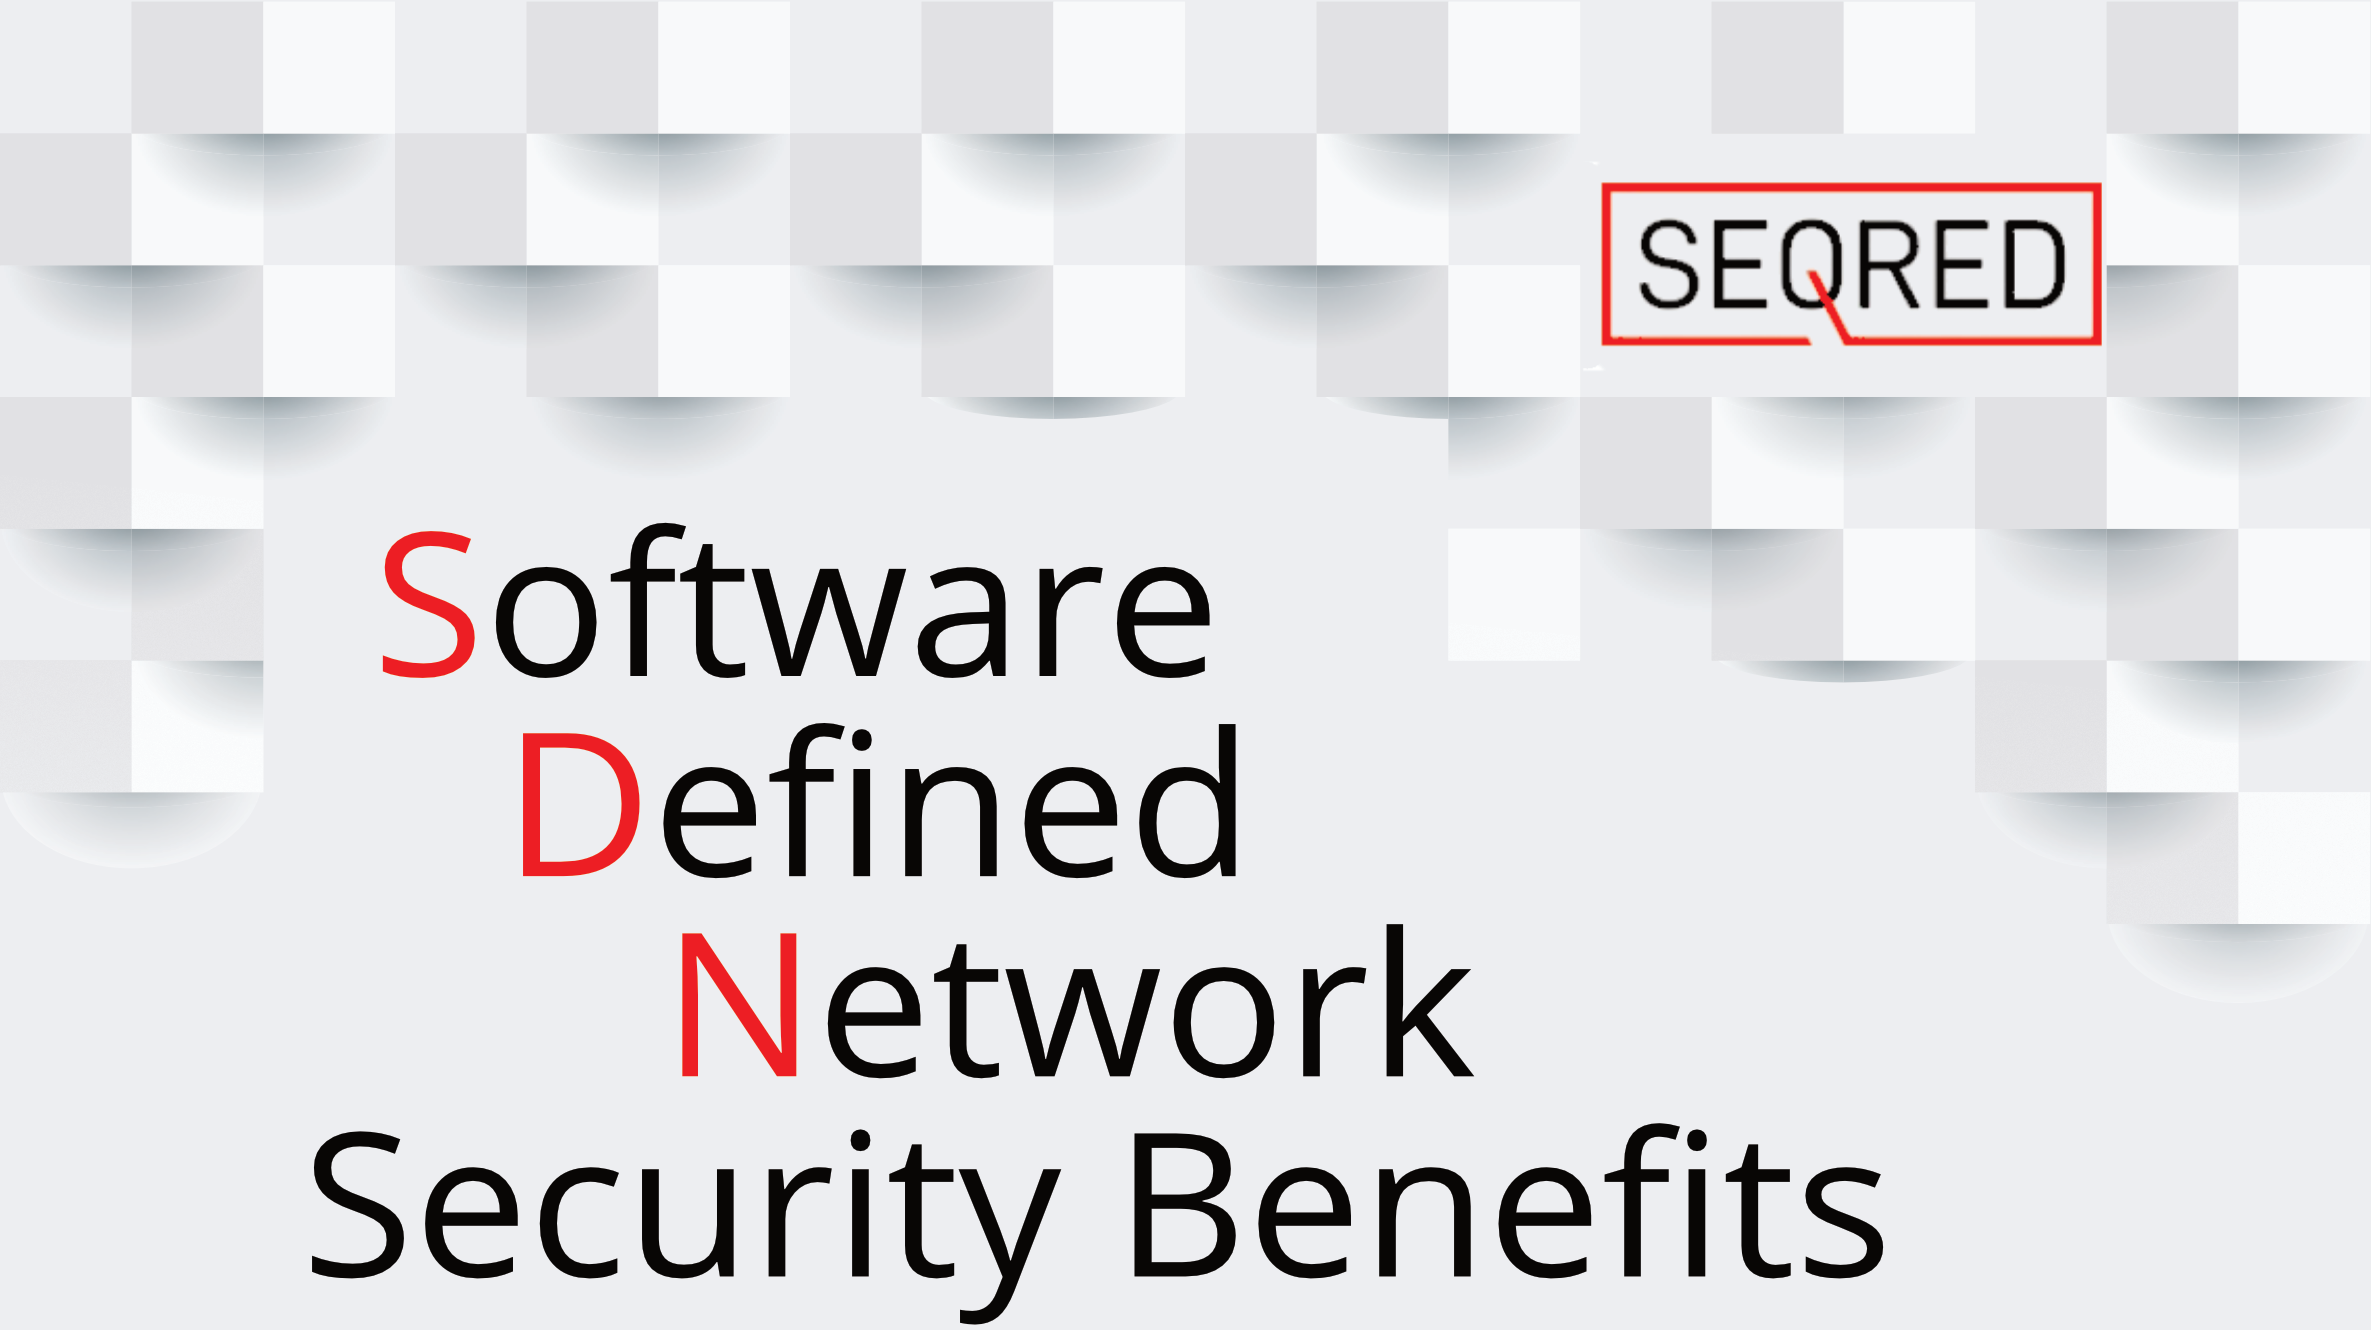 Software Defined Network Security Benefits